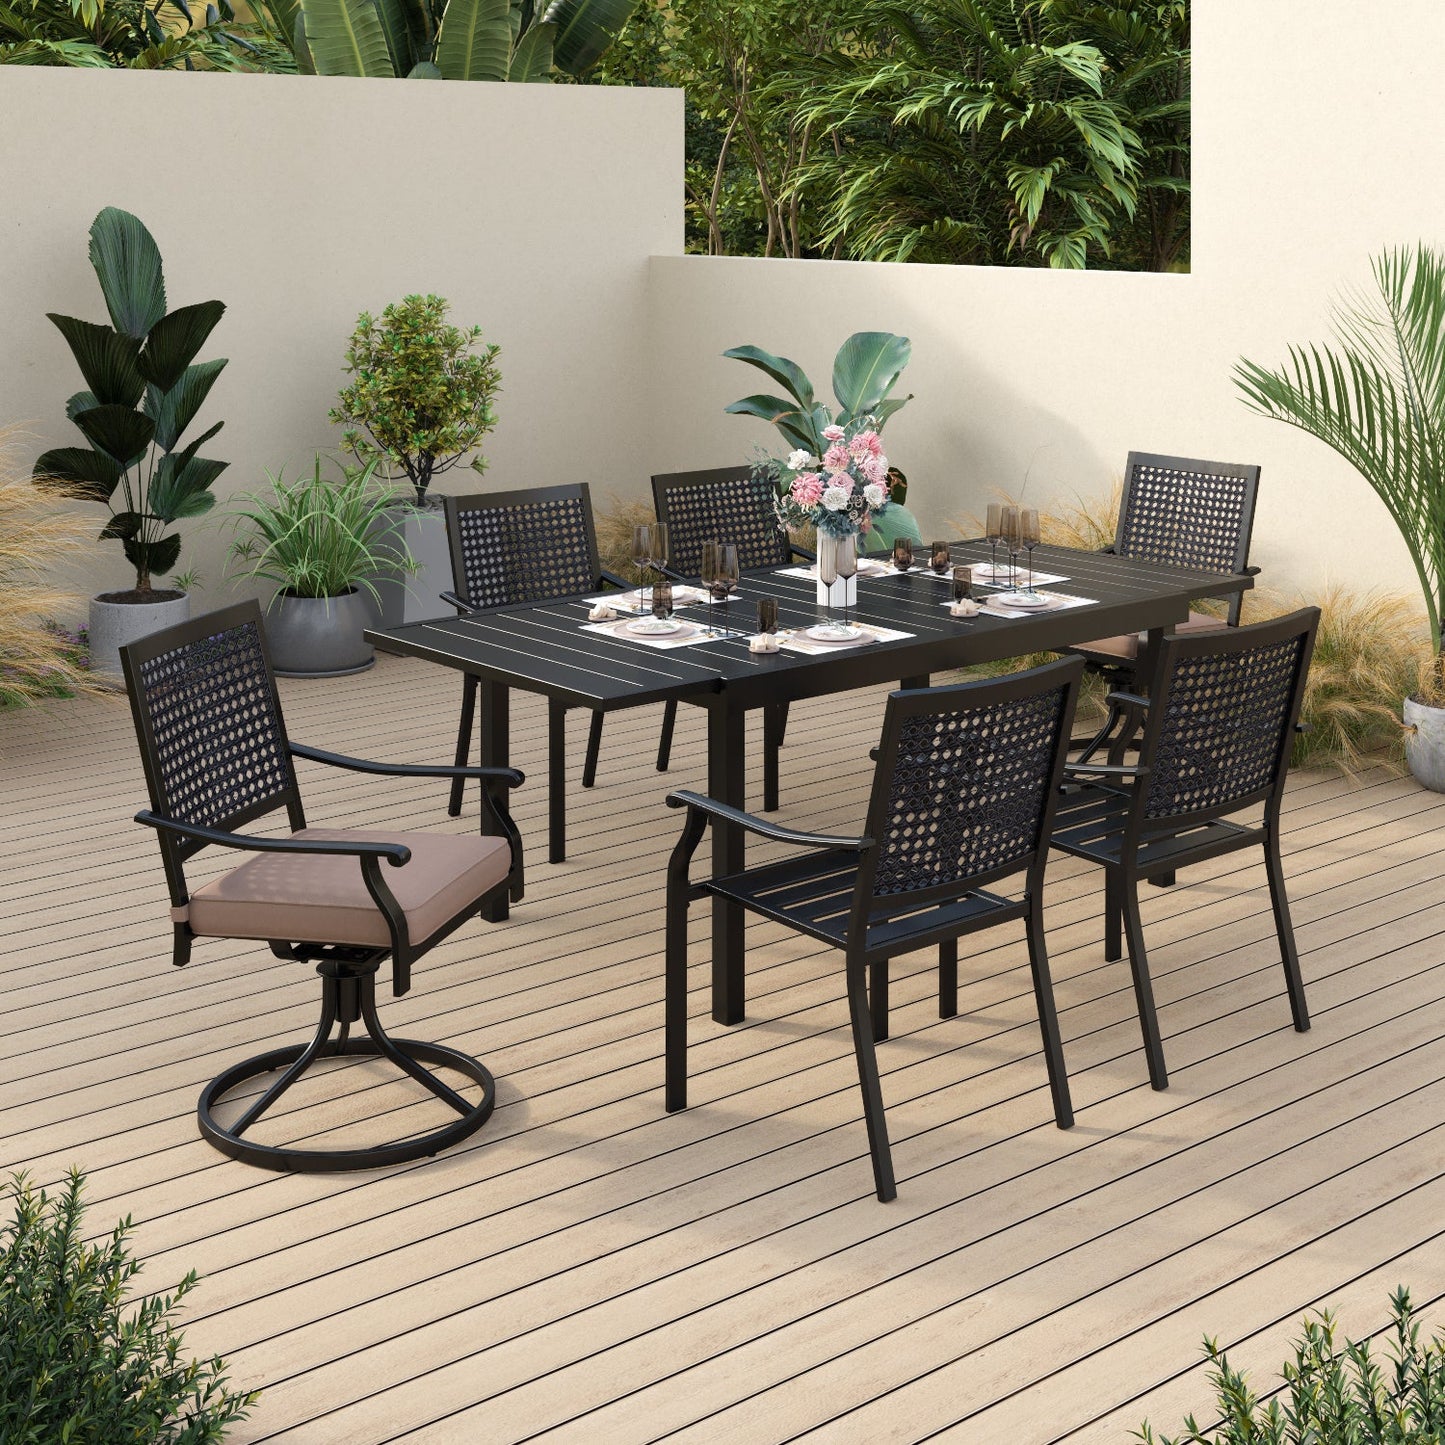 Sophia & William 7 Piece Patio Dining Set 1 Piece Metal Rectangle Table&6 Pieces Outdoor Patio Dining Chairs